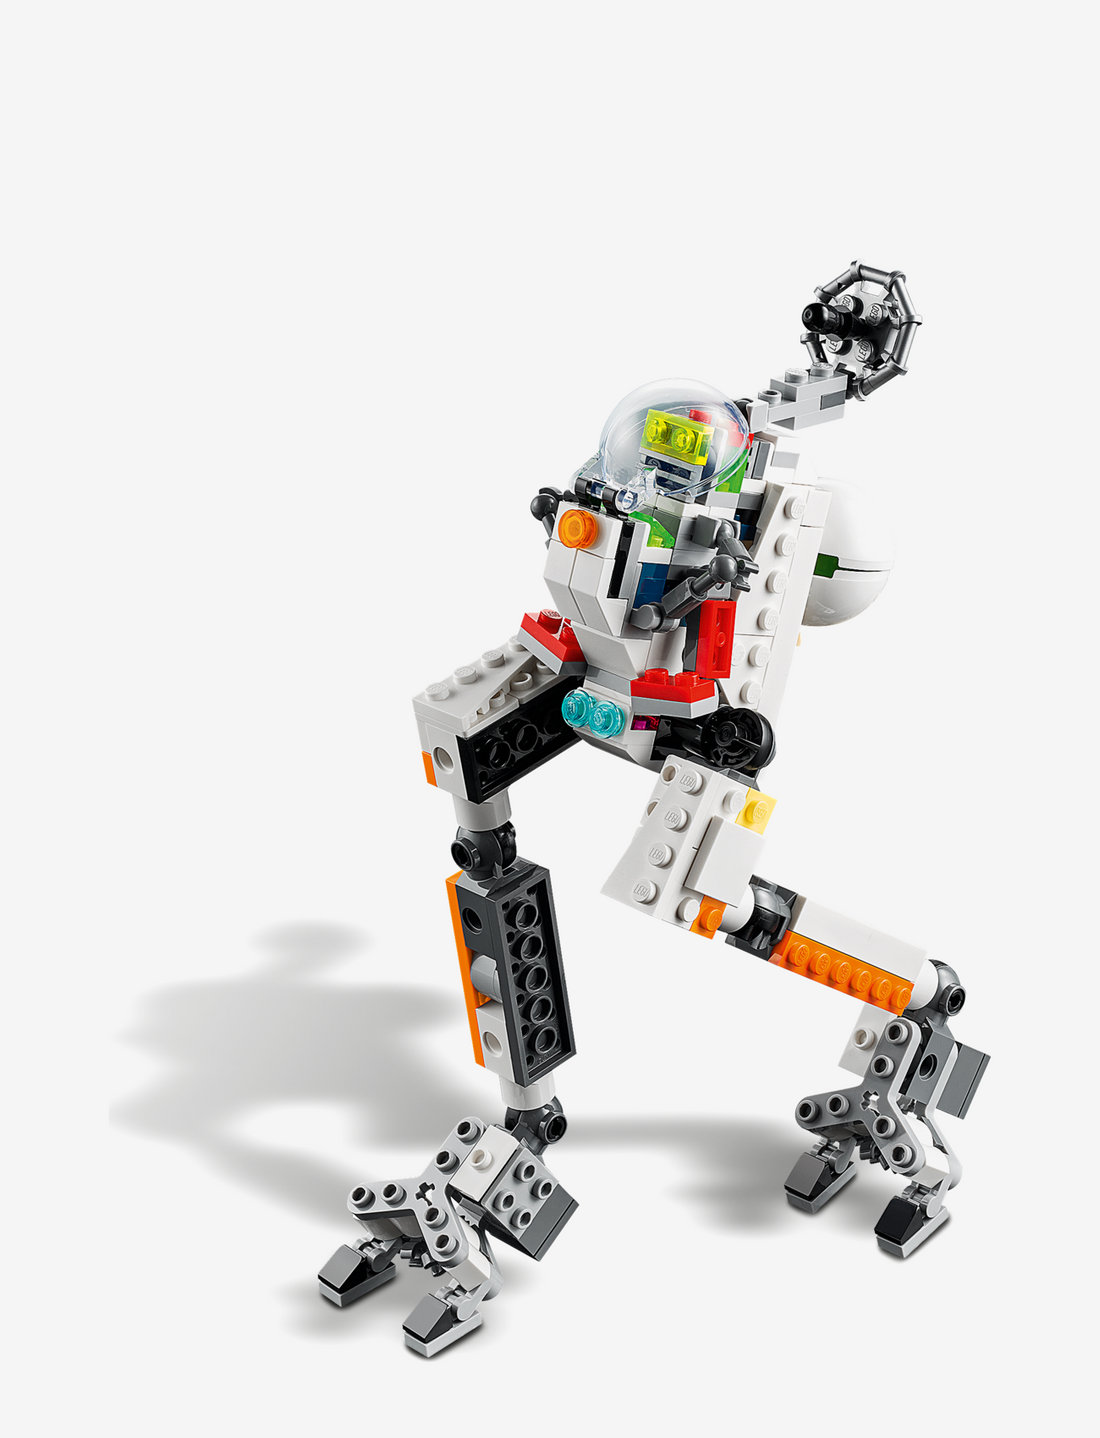 Hælde Fremkald Nat sted LEGO 3 In 1 Space Mining Mech Space Robot Toy - Boozt.com